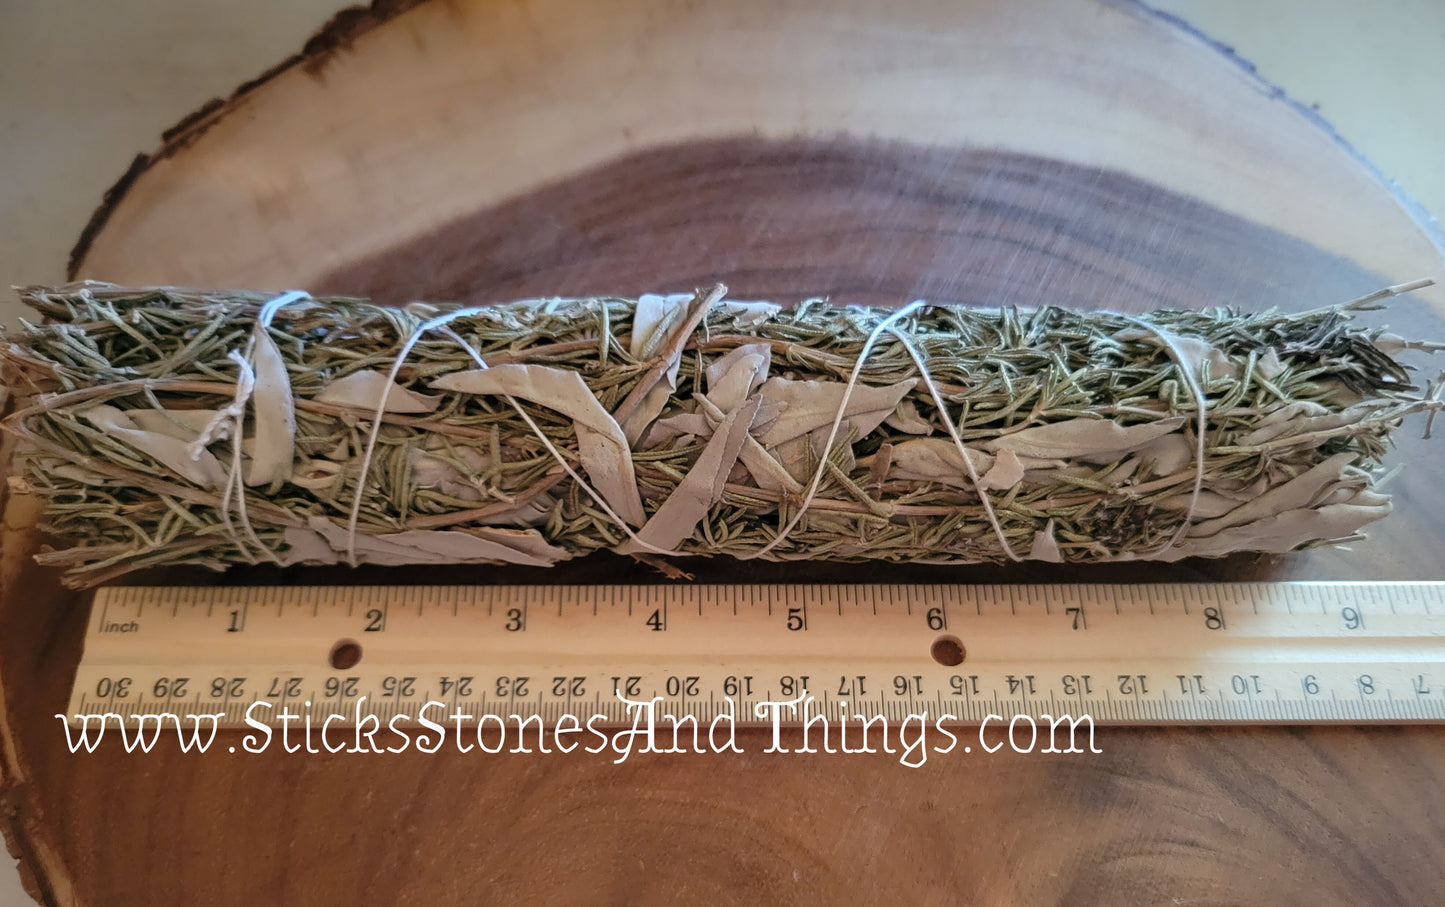 White Sage with Rosemary Smudge Stick 9-10 inches